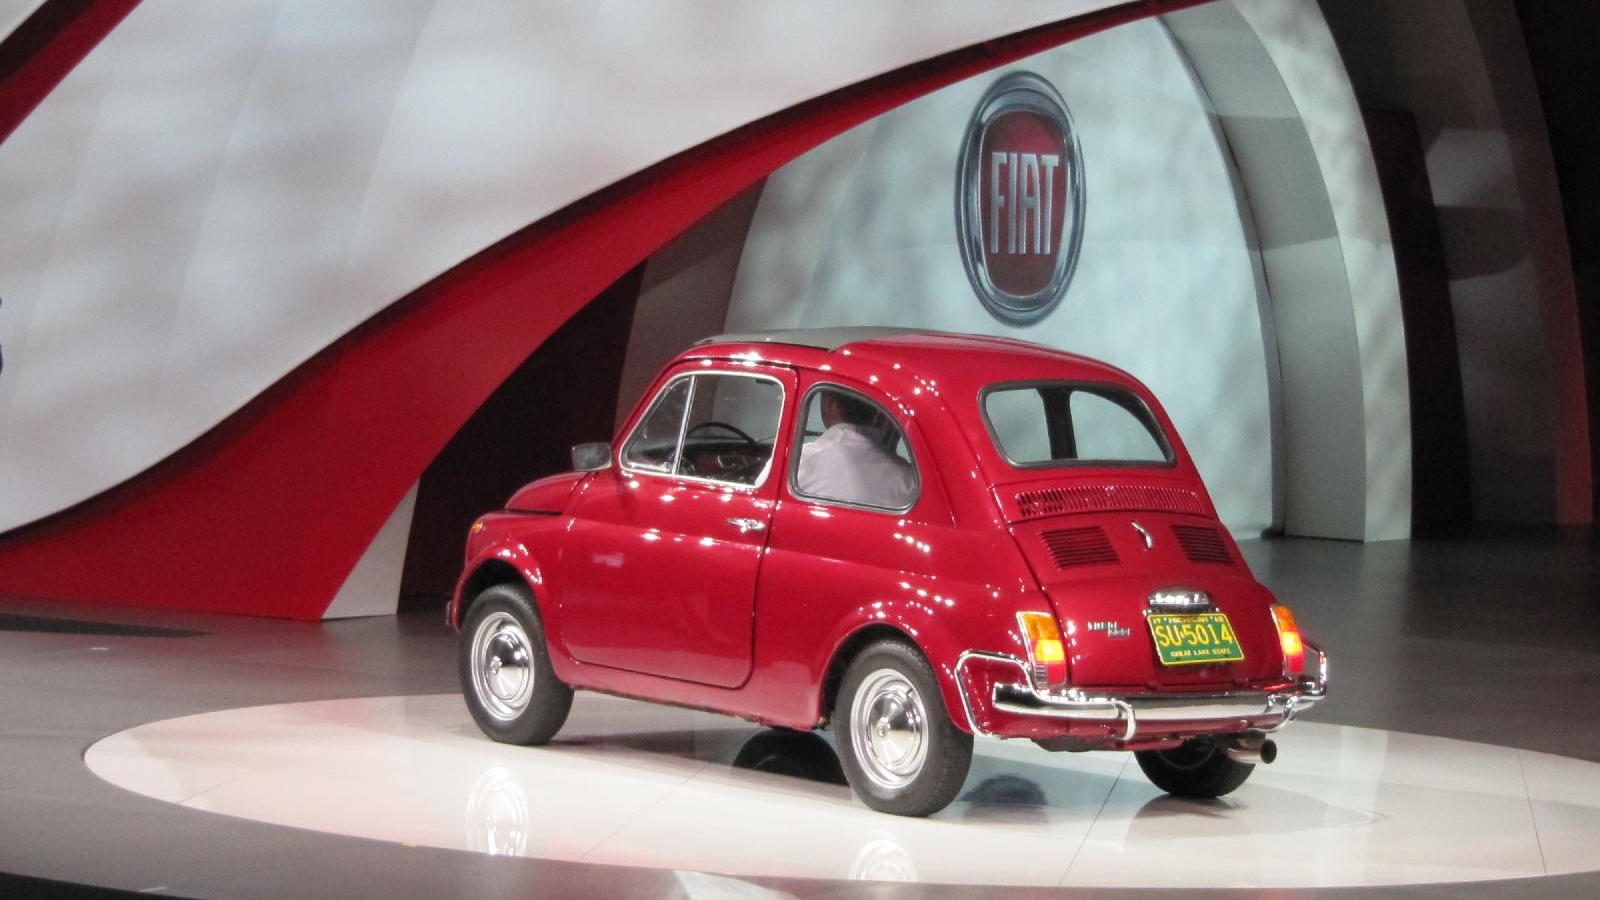 2011 Fiat 500 launch event at the 2010 Los Angeles Auto Show, November 2010